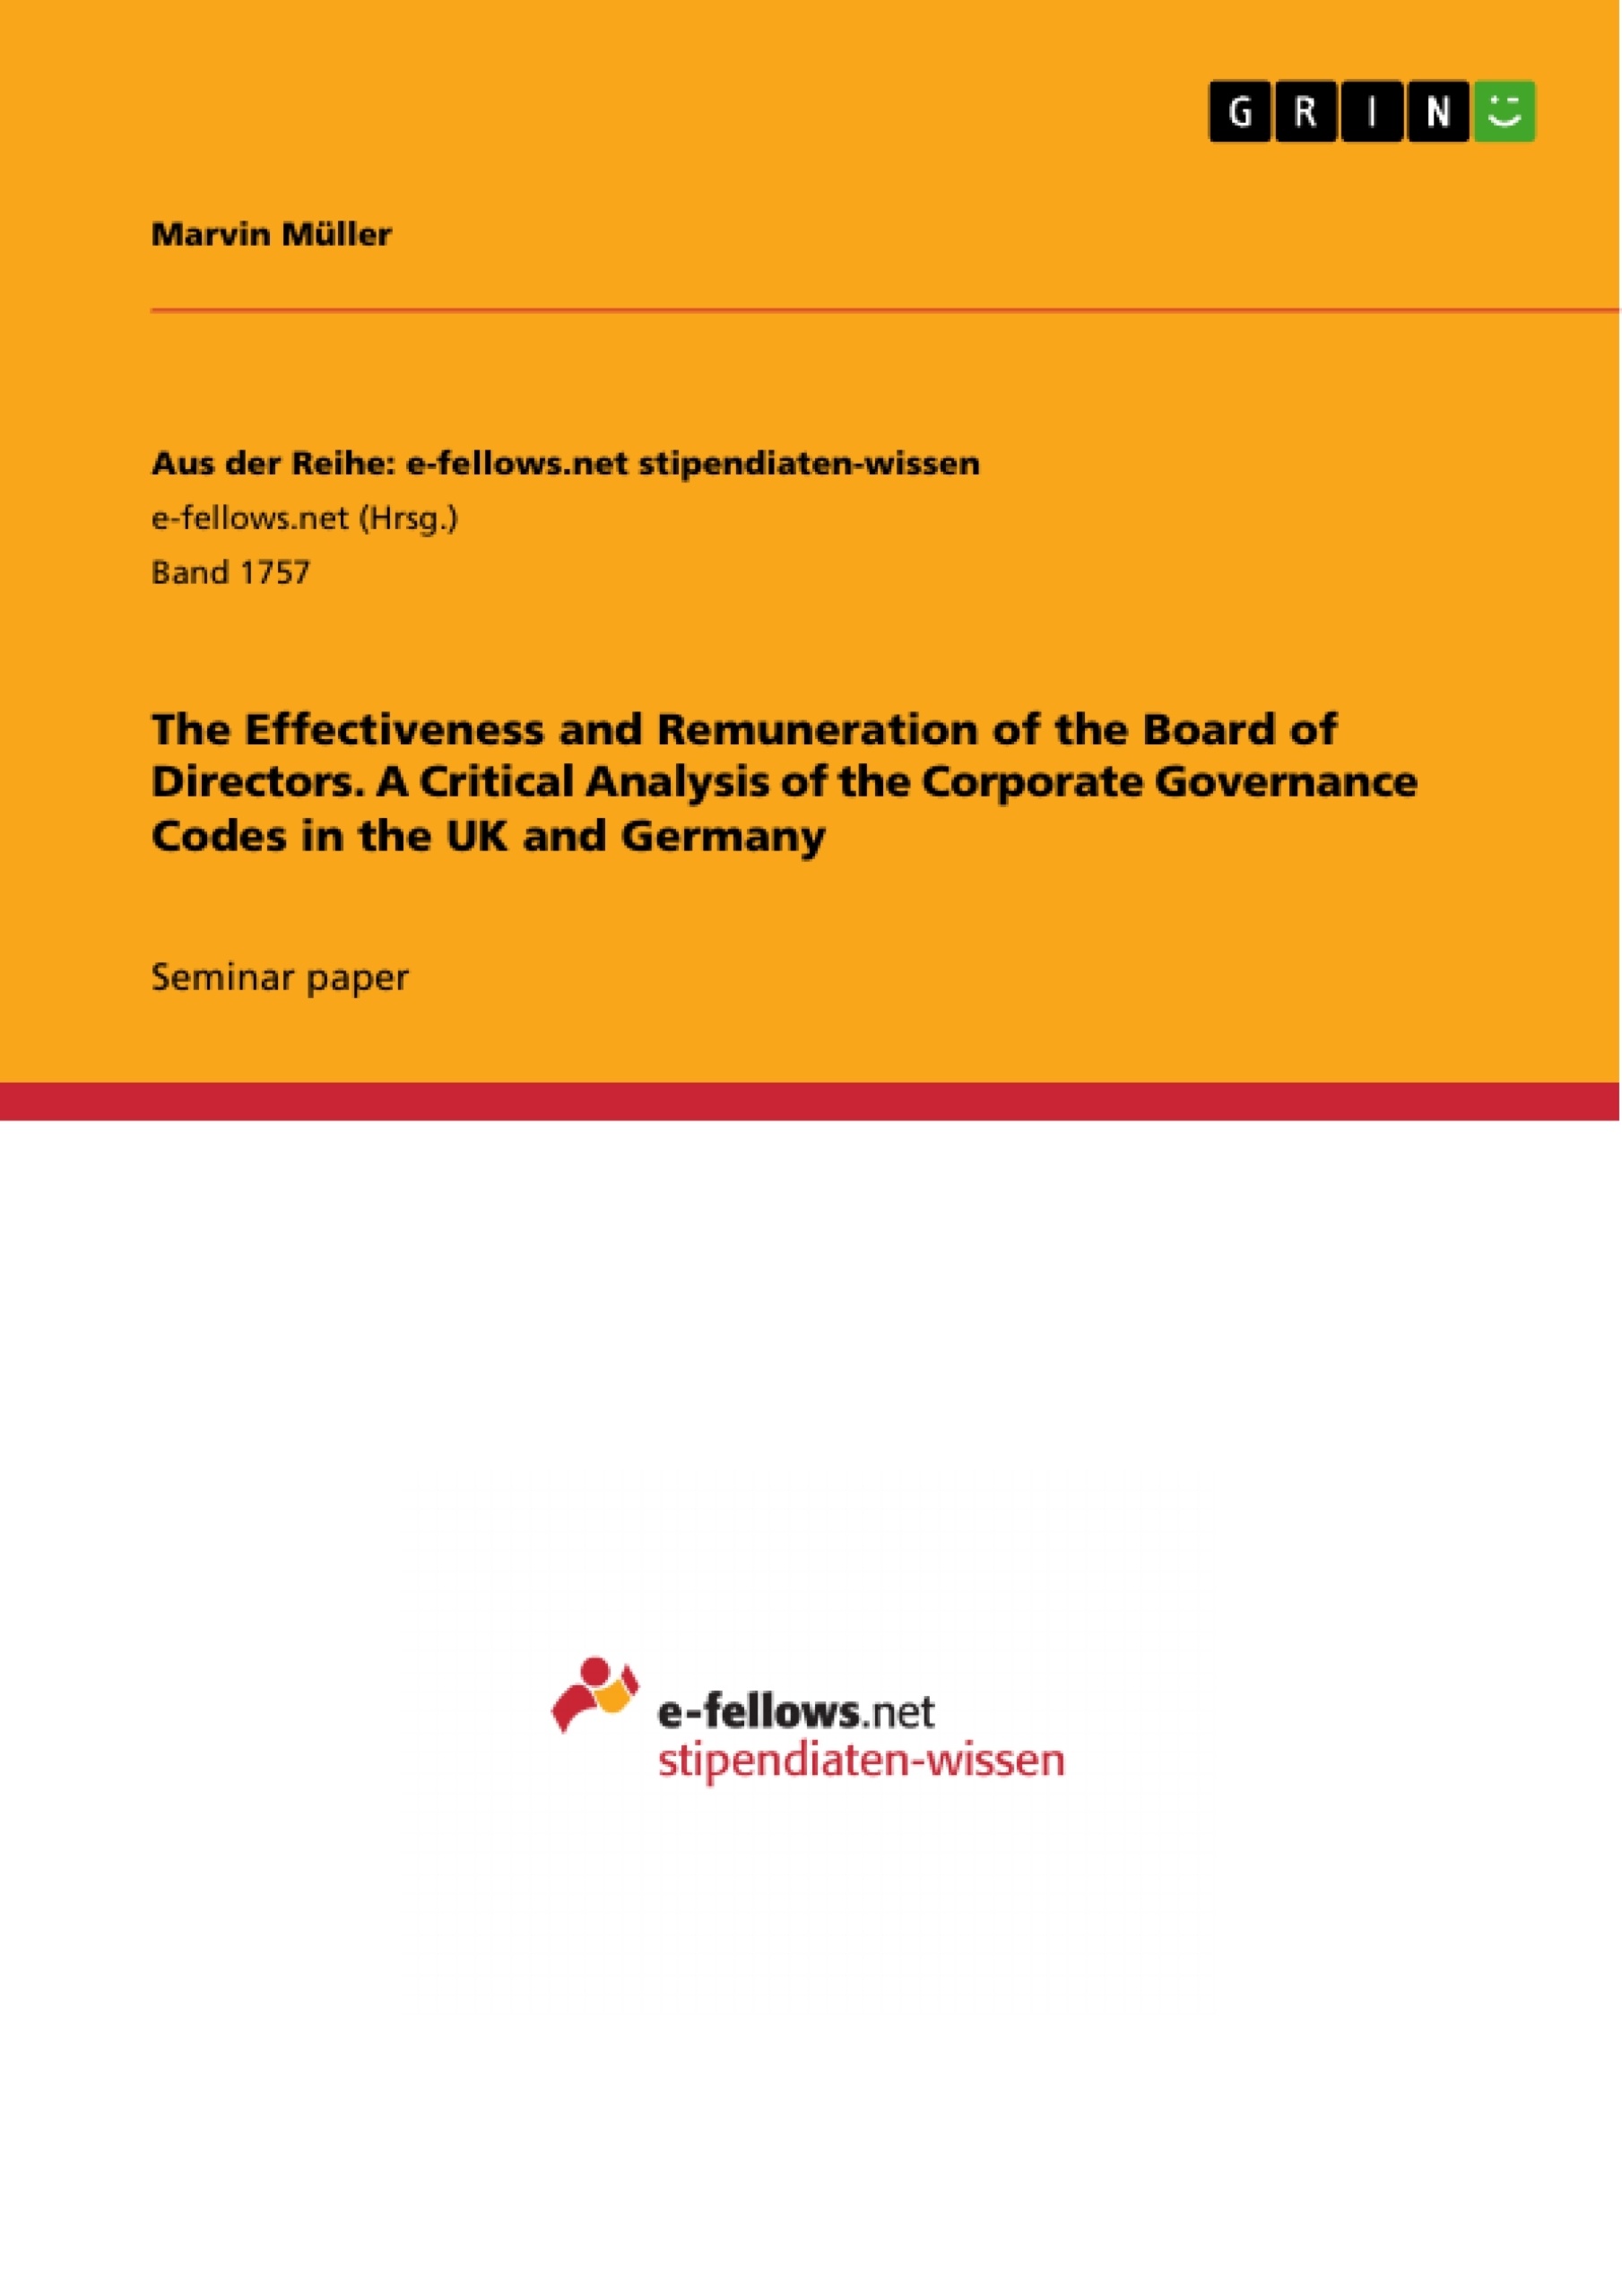 Title: The Effectiveness and Remuneration of the Board of Directors. A Critical Analysis of the Corporate Governance Codes in the UK and Germany